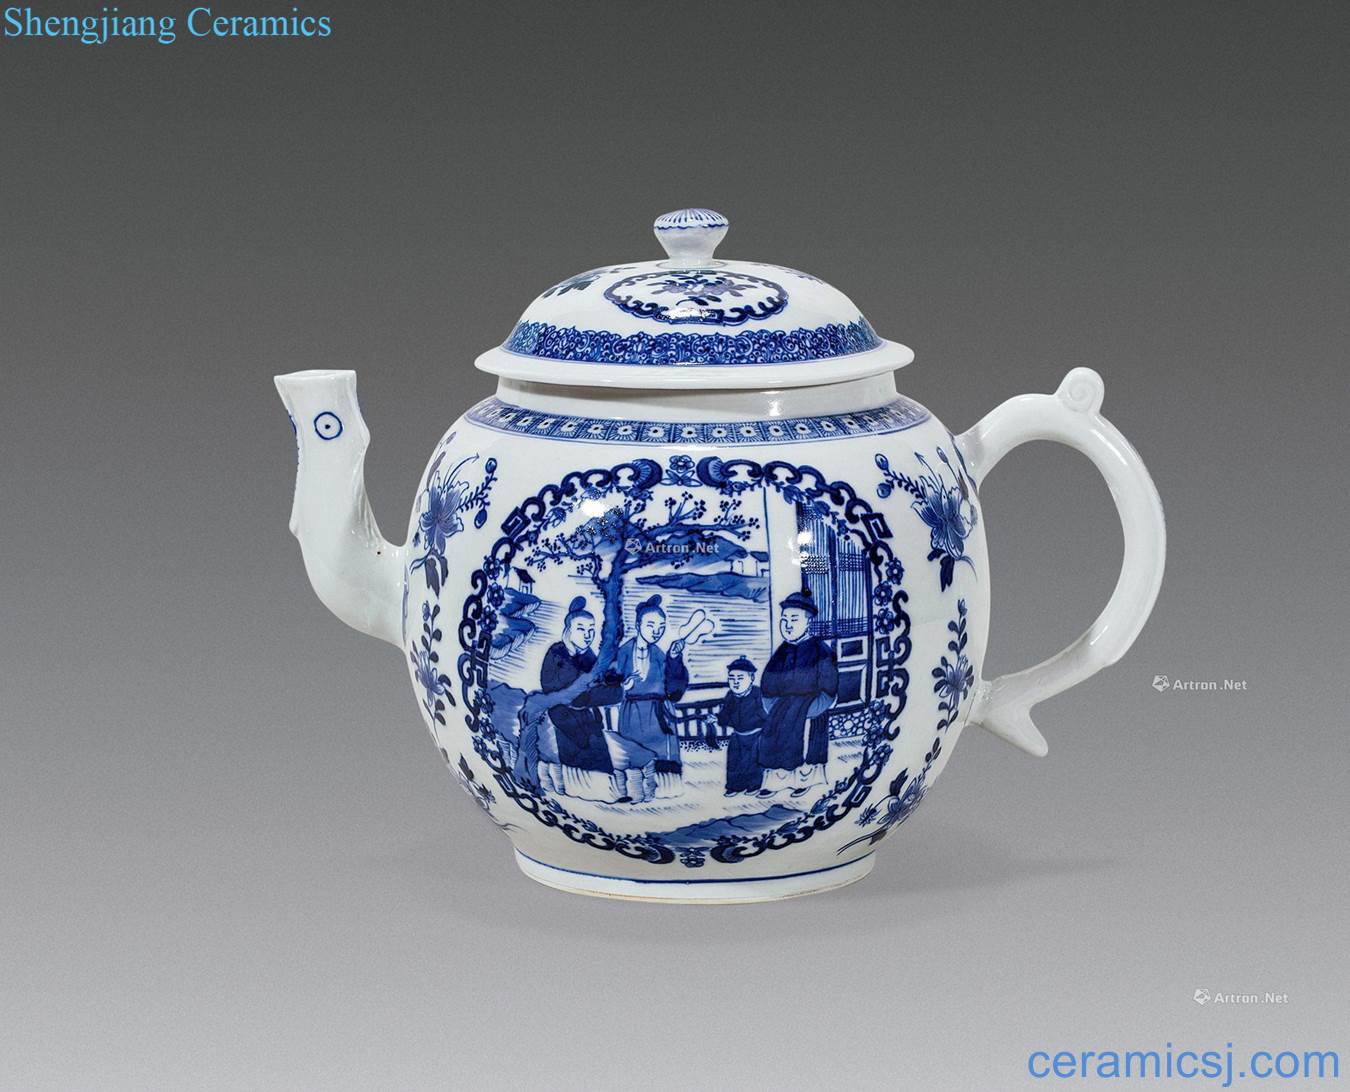 In the 19th century blue and white teapot window story characters